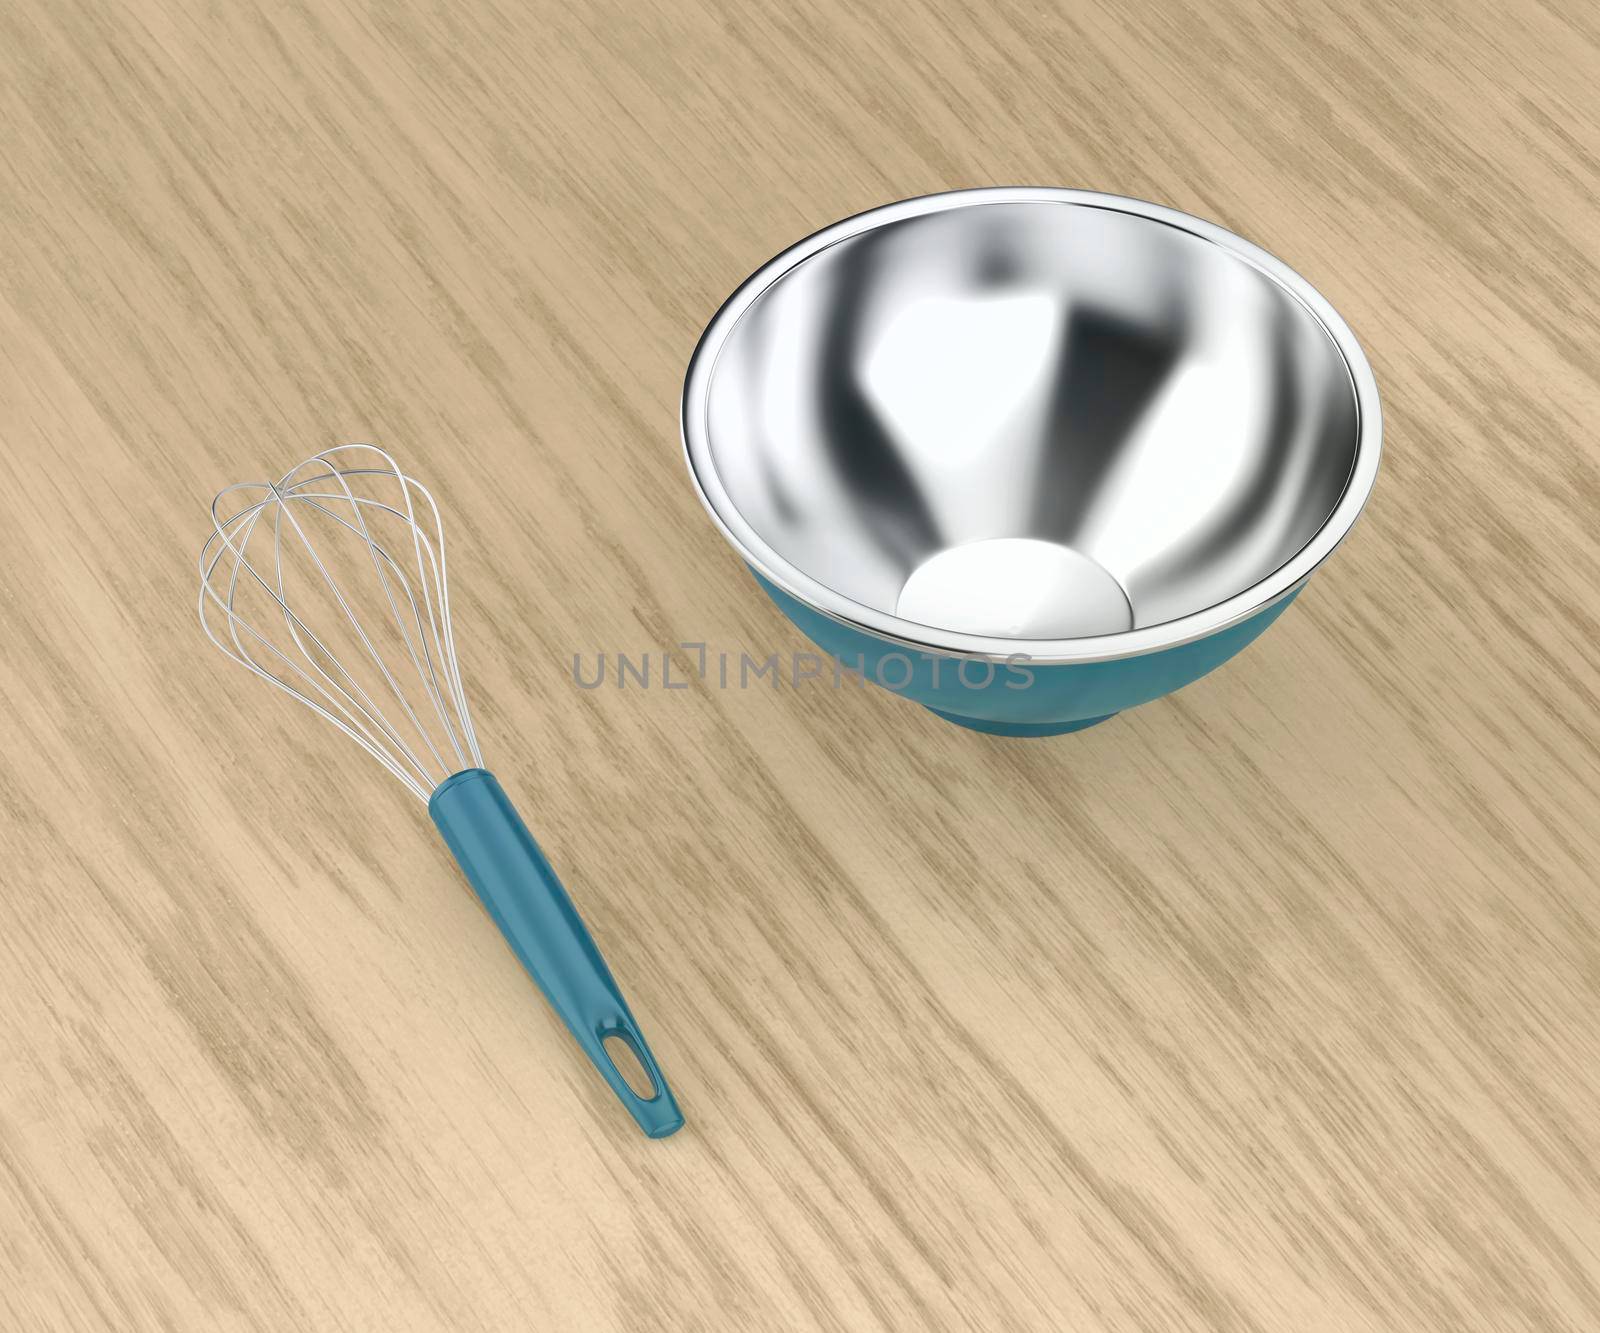 Balloon whisk and empty metal bowl on wood table